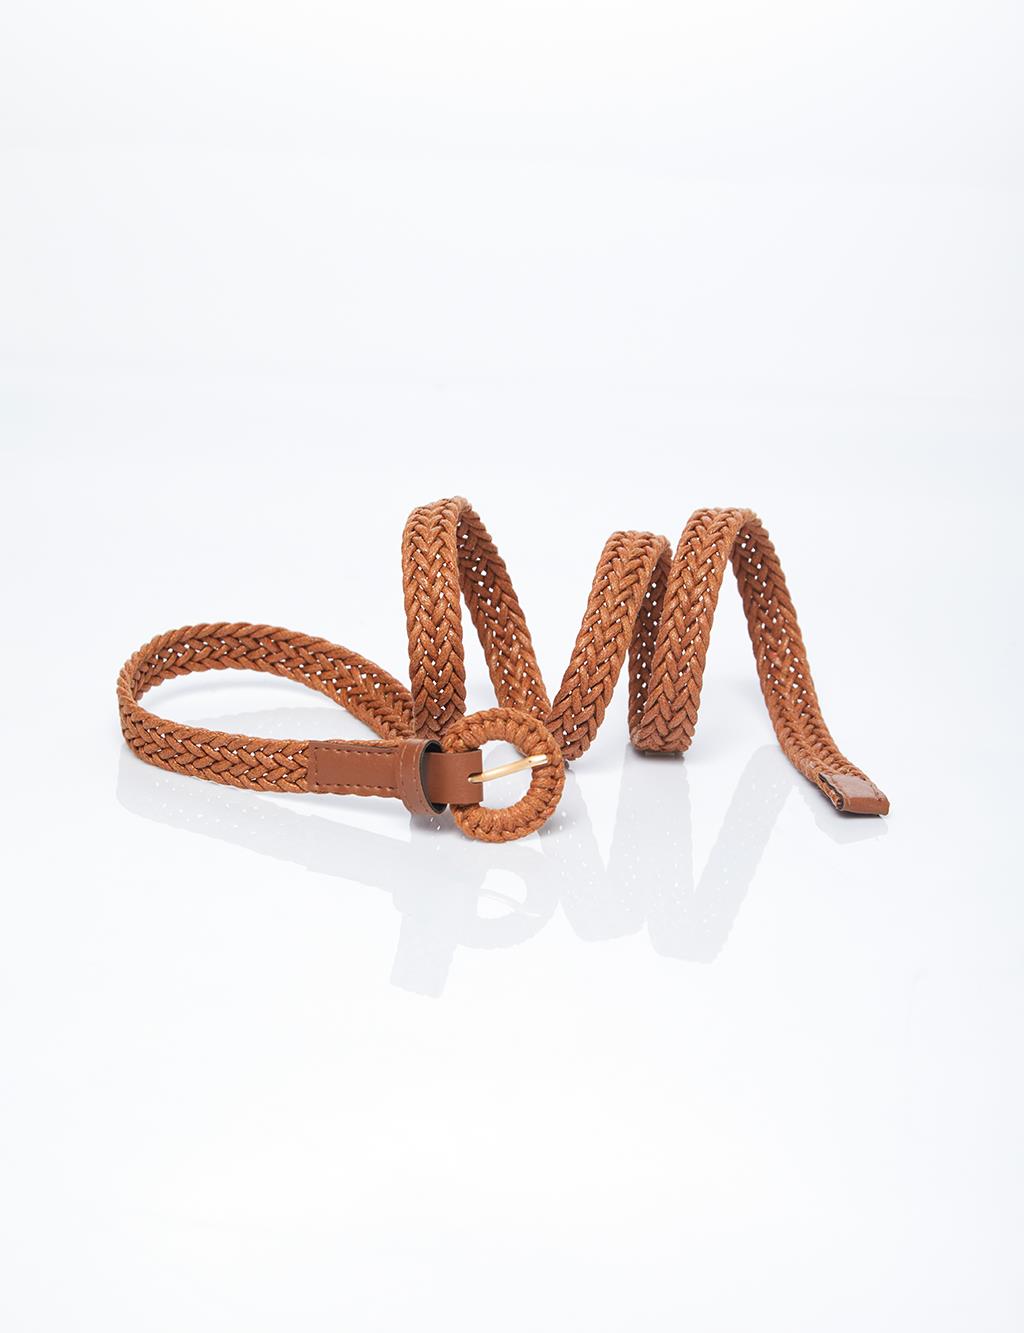 Buckle Knitted Belt Brown